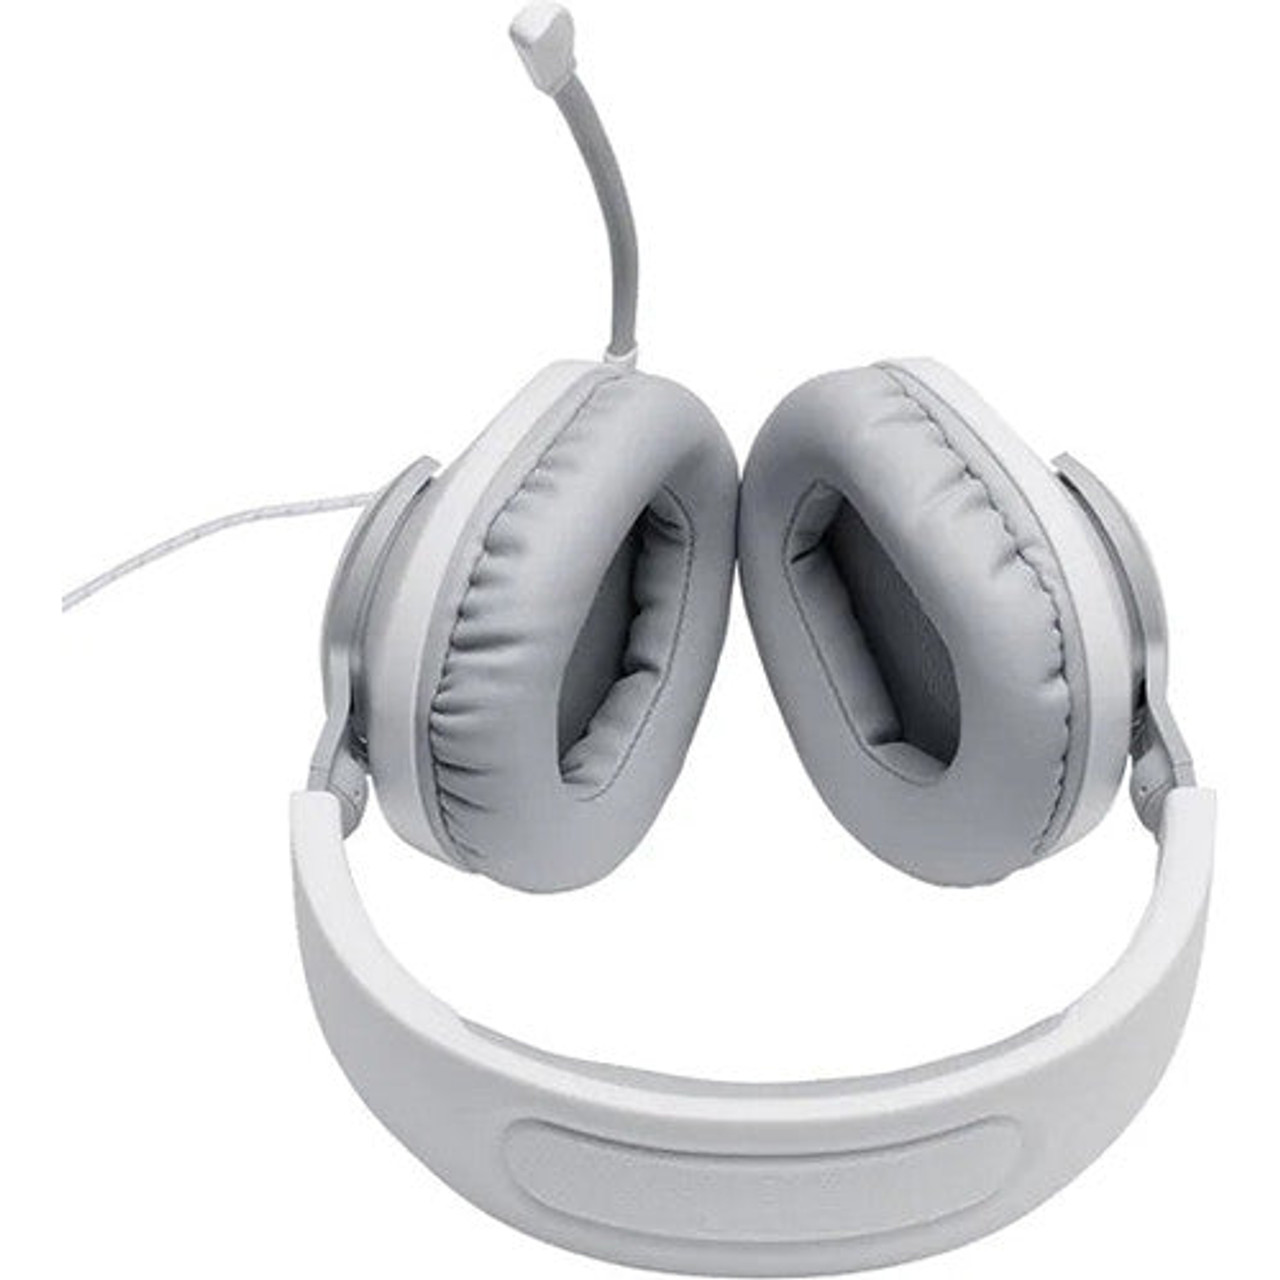 JBL JBLQUANTUM100WAM-Z Quantum 100 Wired Headset for Gaming White -  Refurbished - Deal Parade